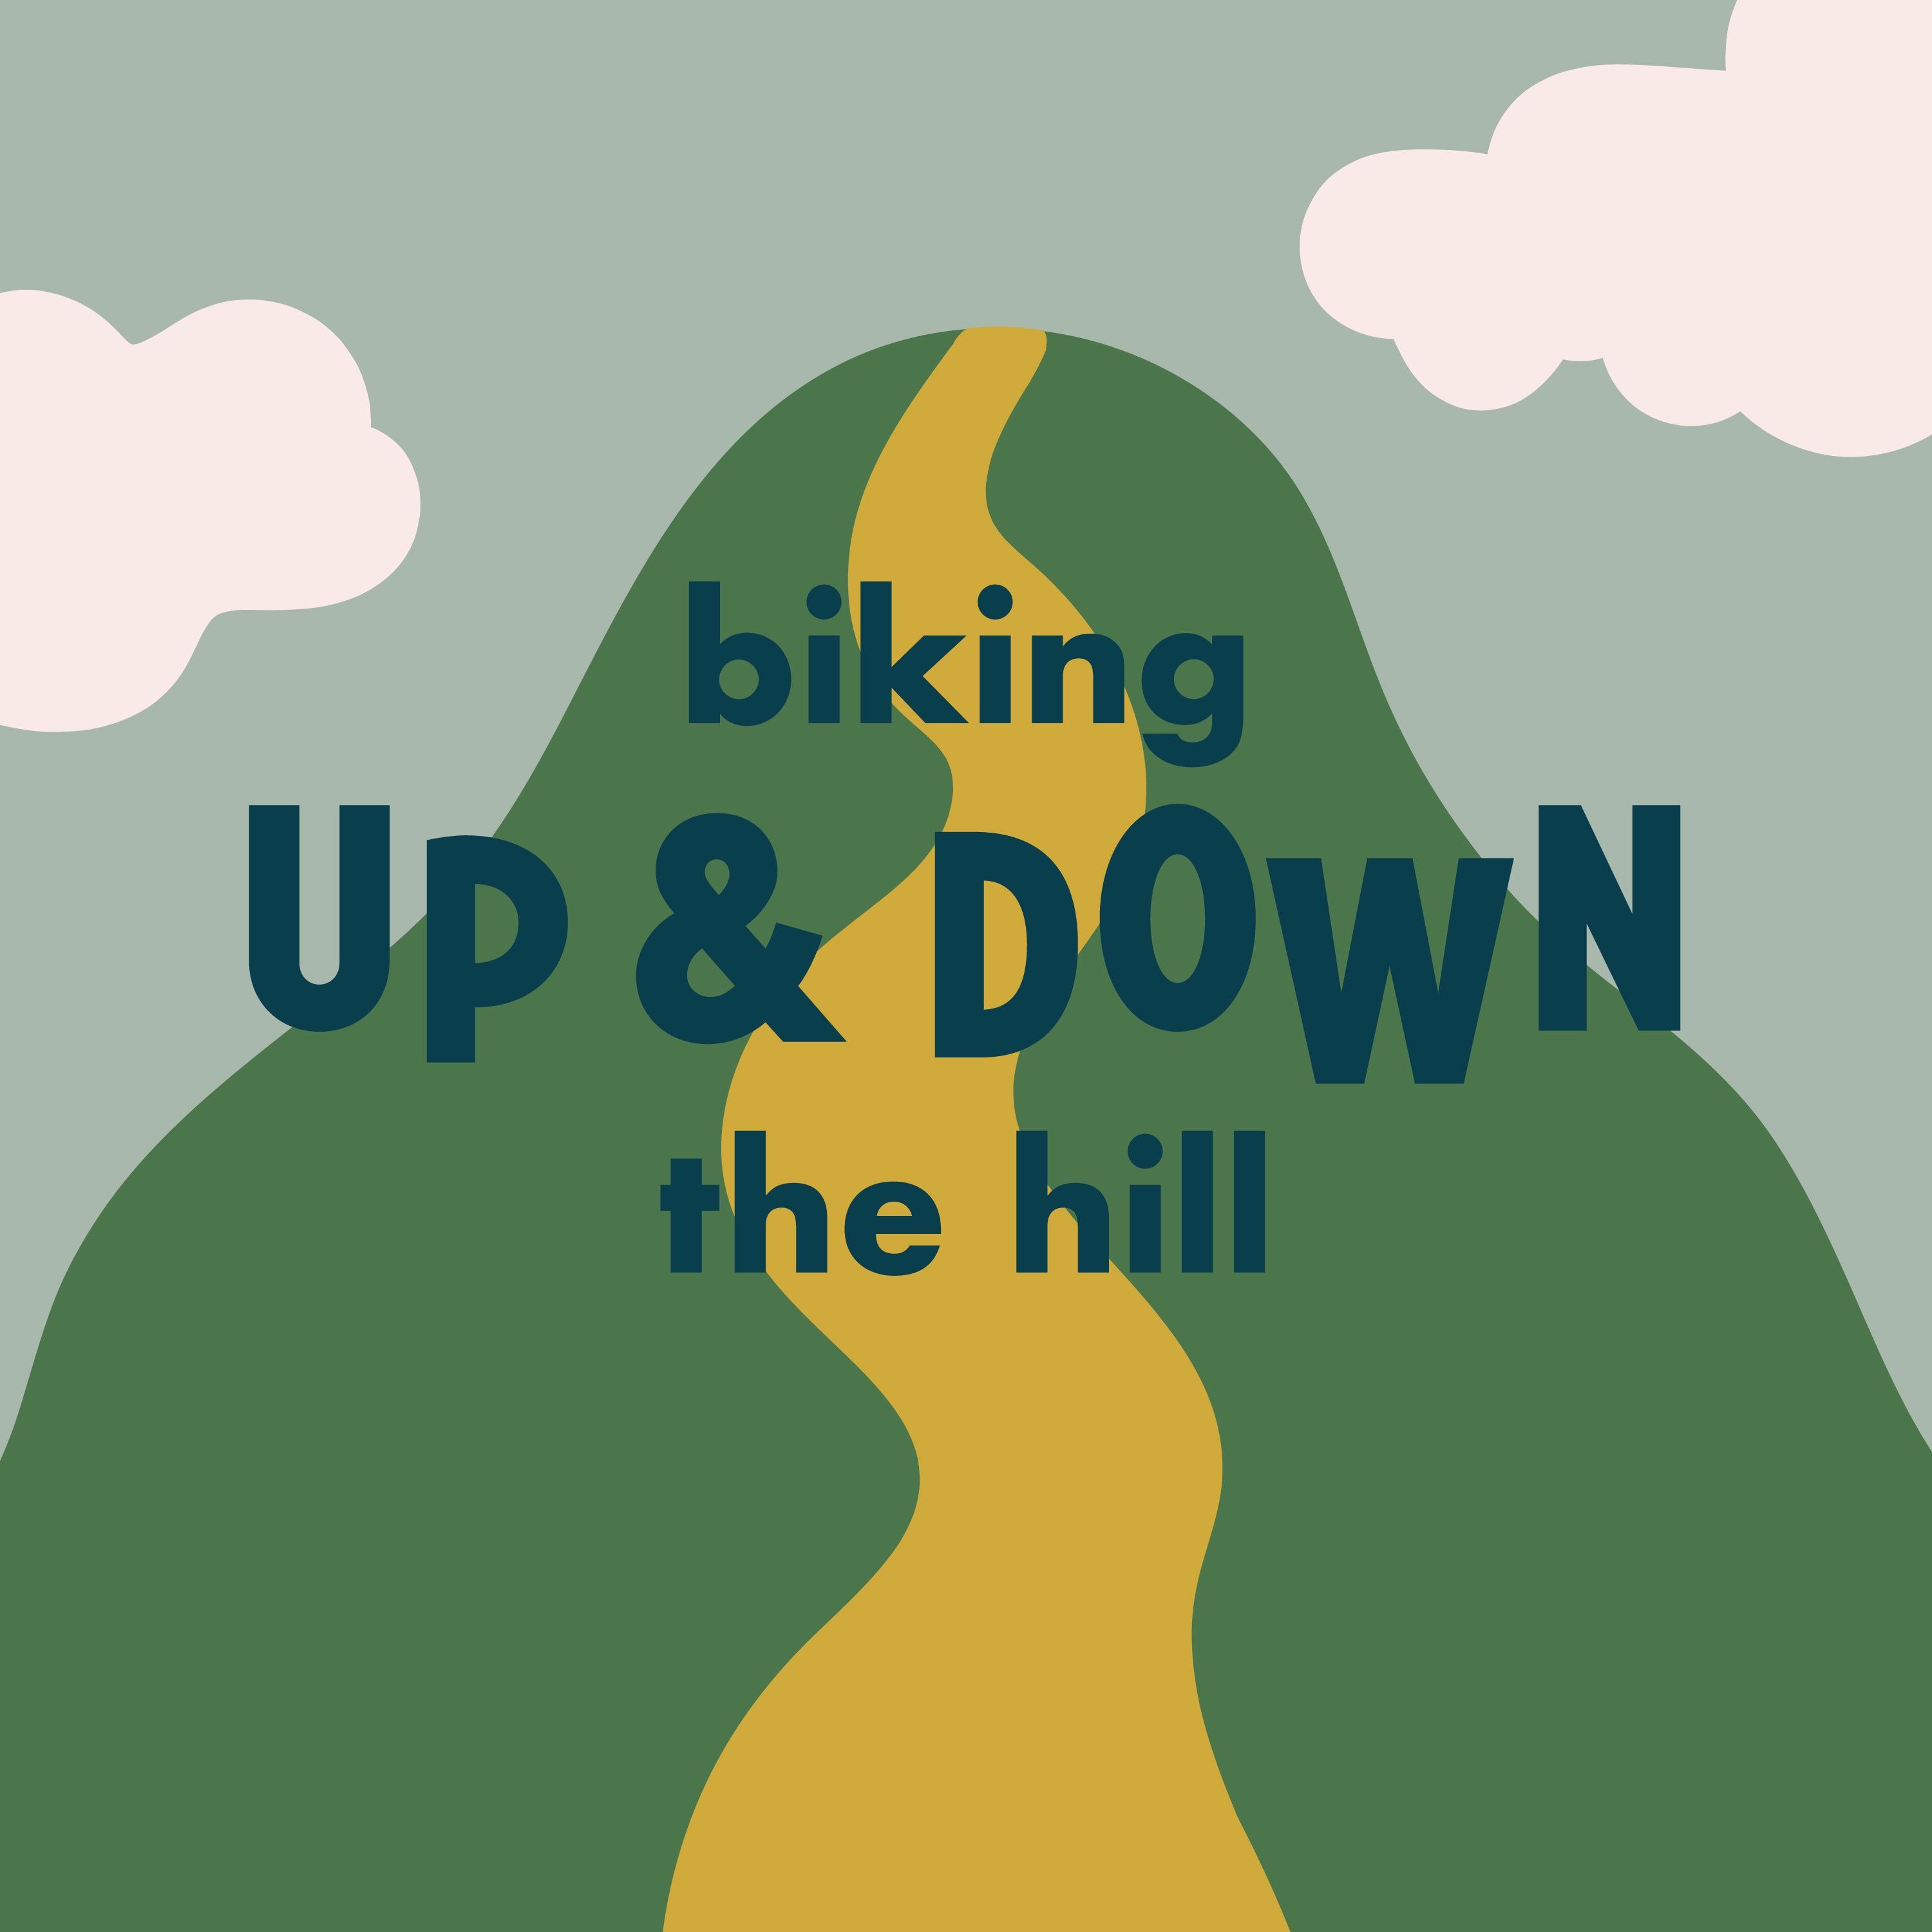 67-biking-up-and-down-the-hill-like-you